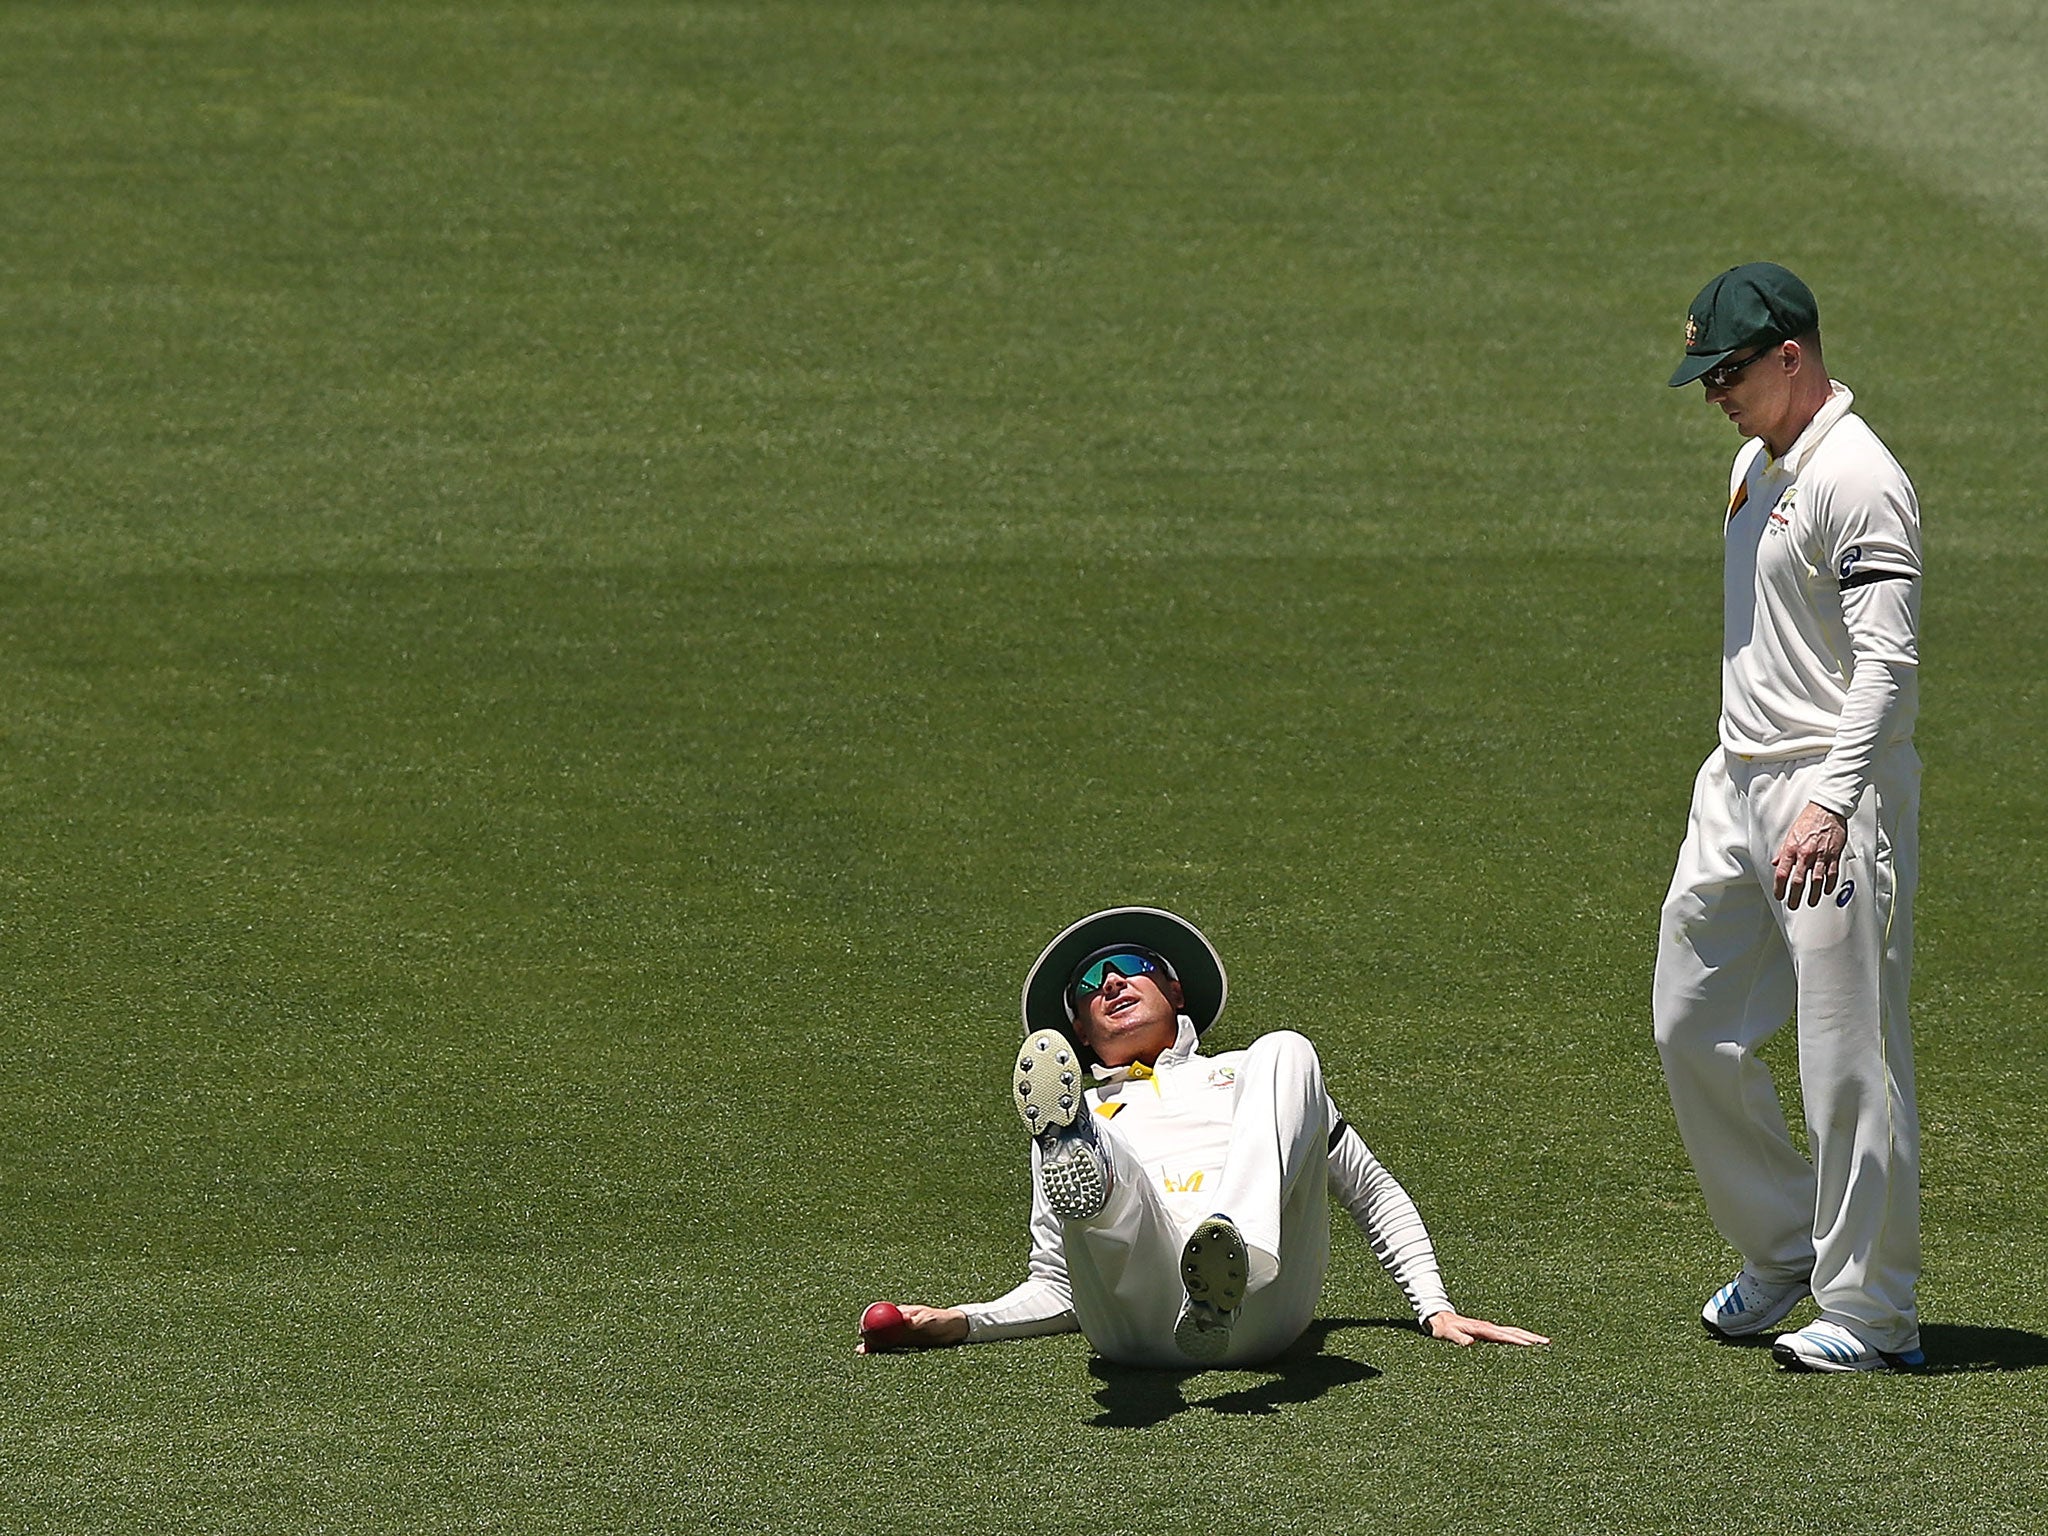 Michael Clarke falls to the ground after suffering a hamstring injury